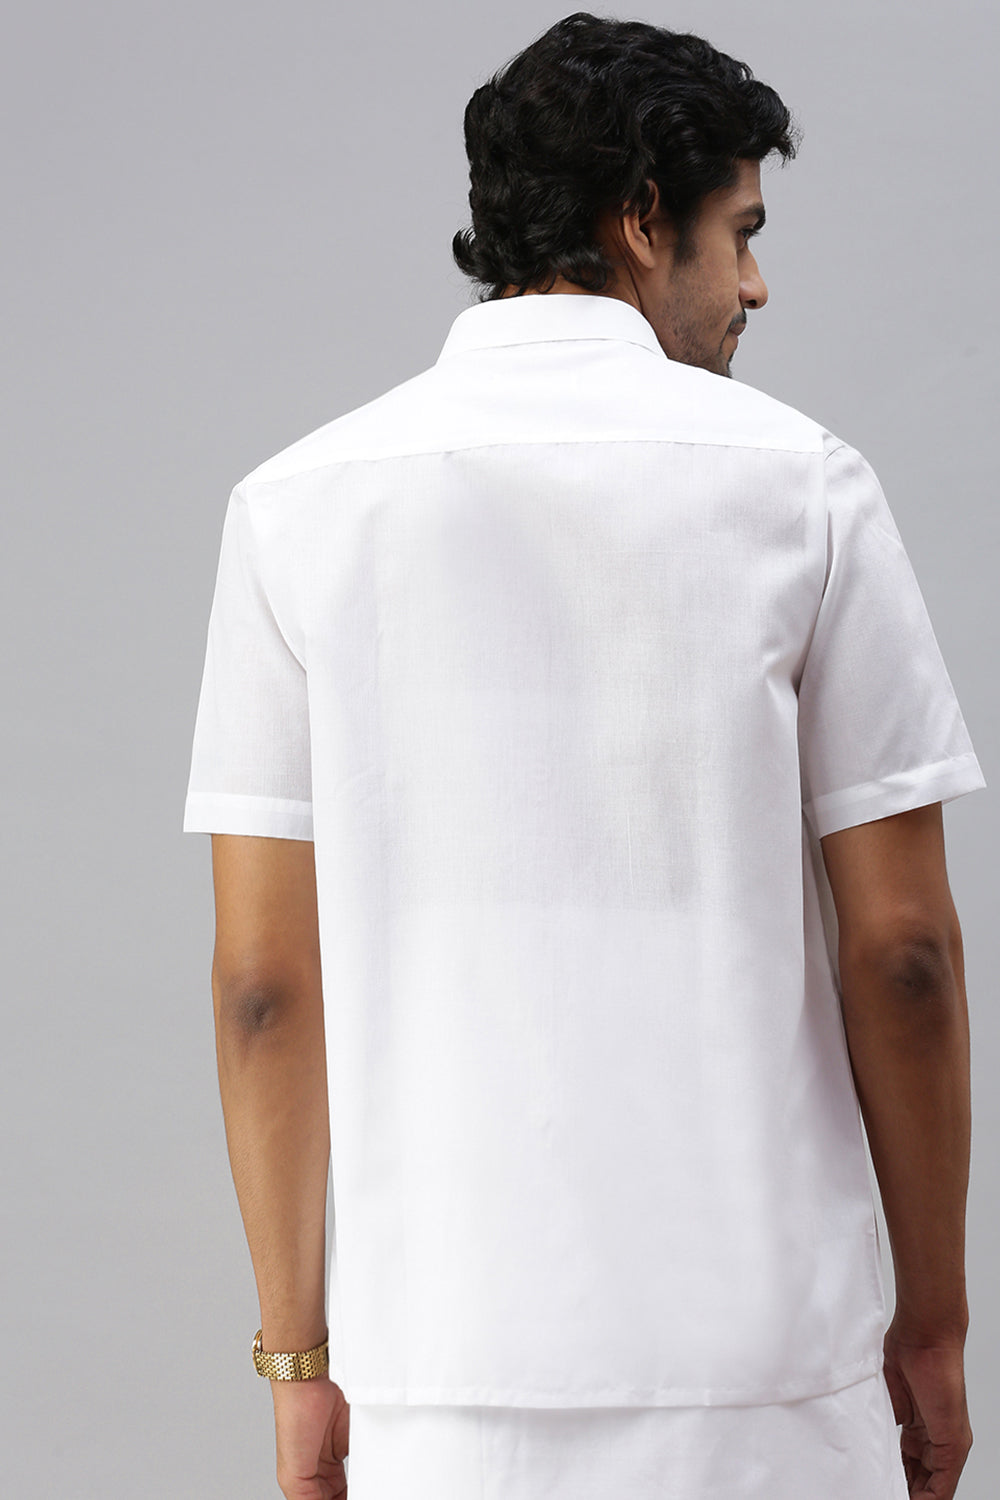 Mens Cotton White Shirt Half Sleeves Viceroy-Back view